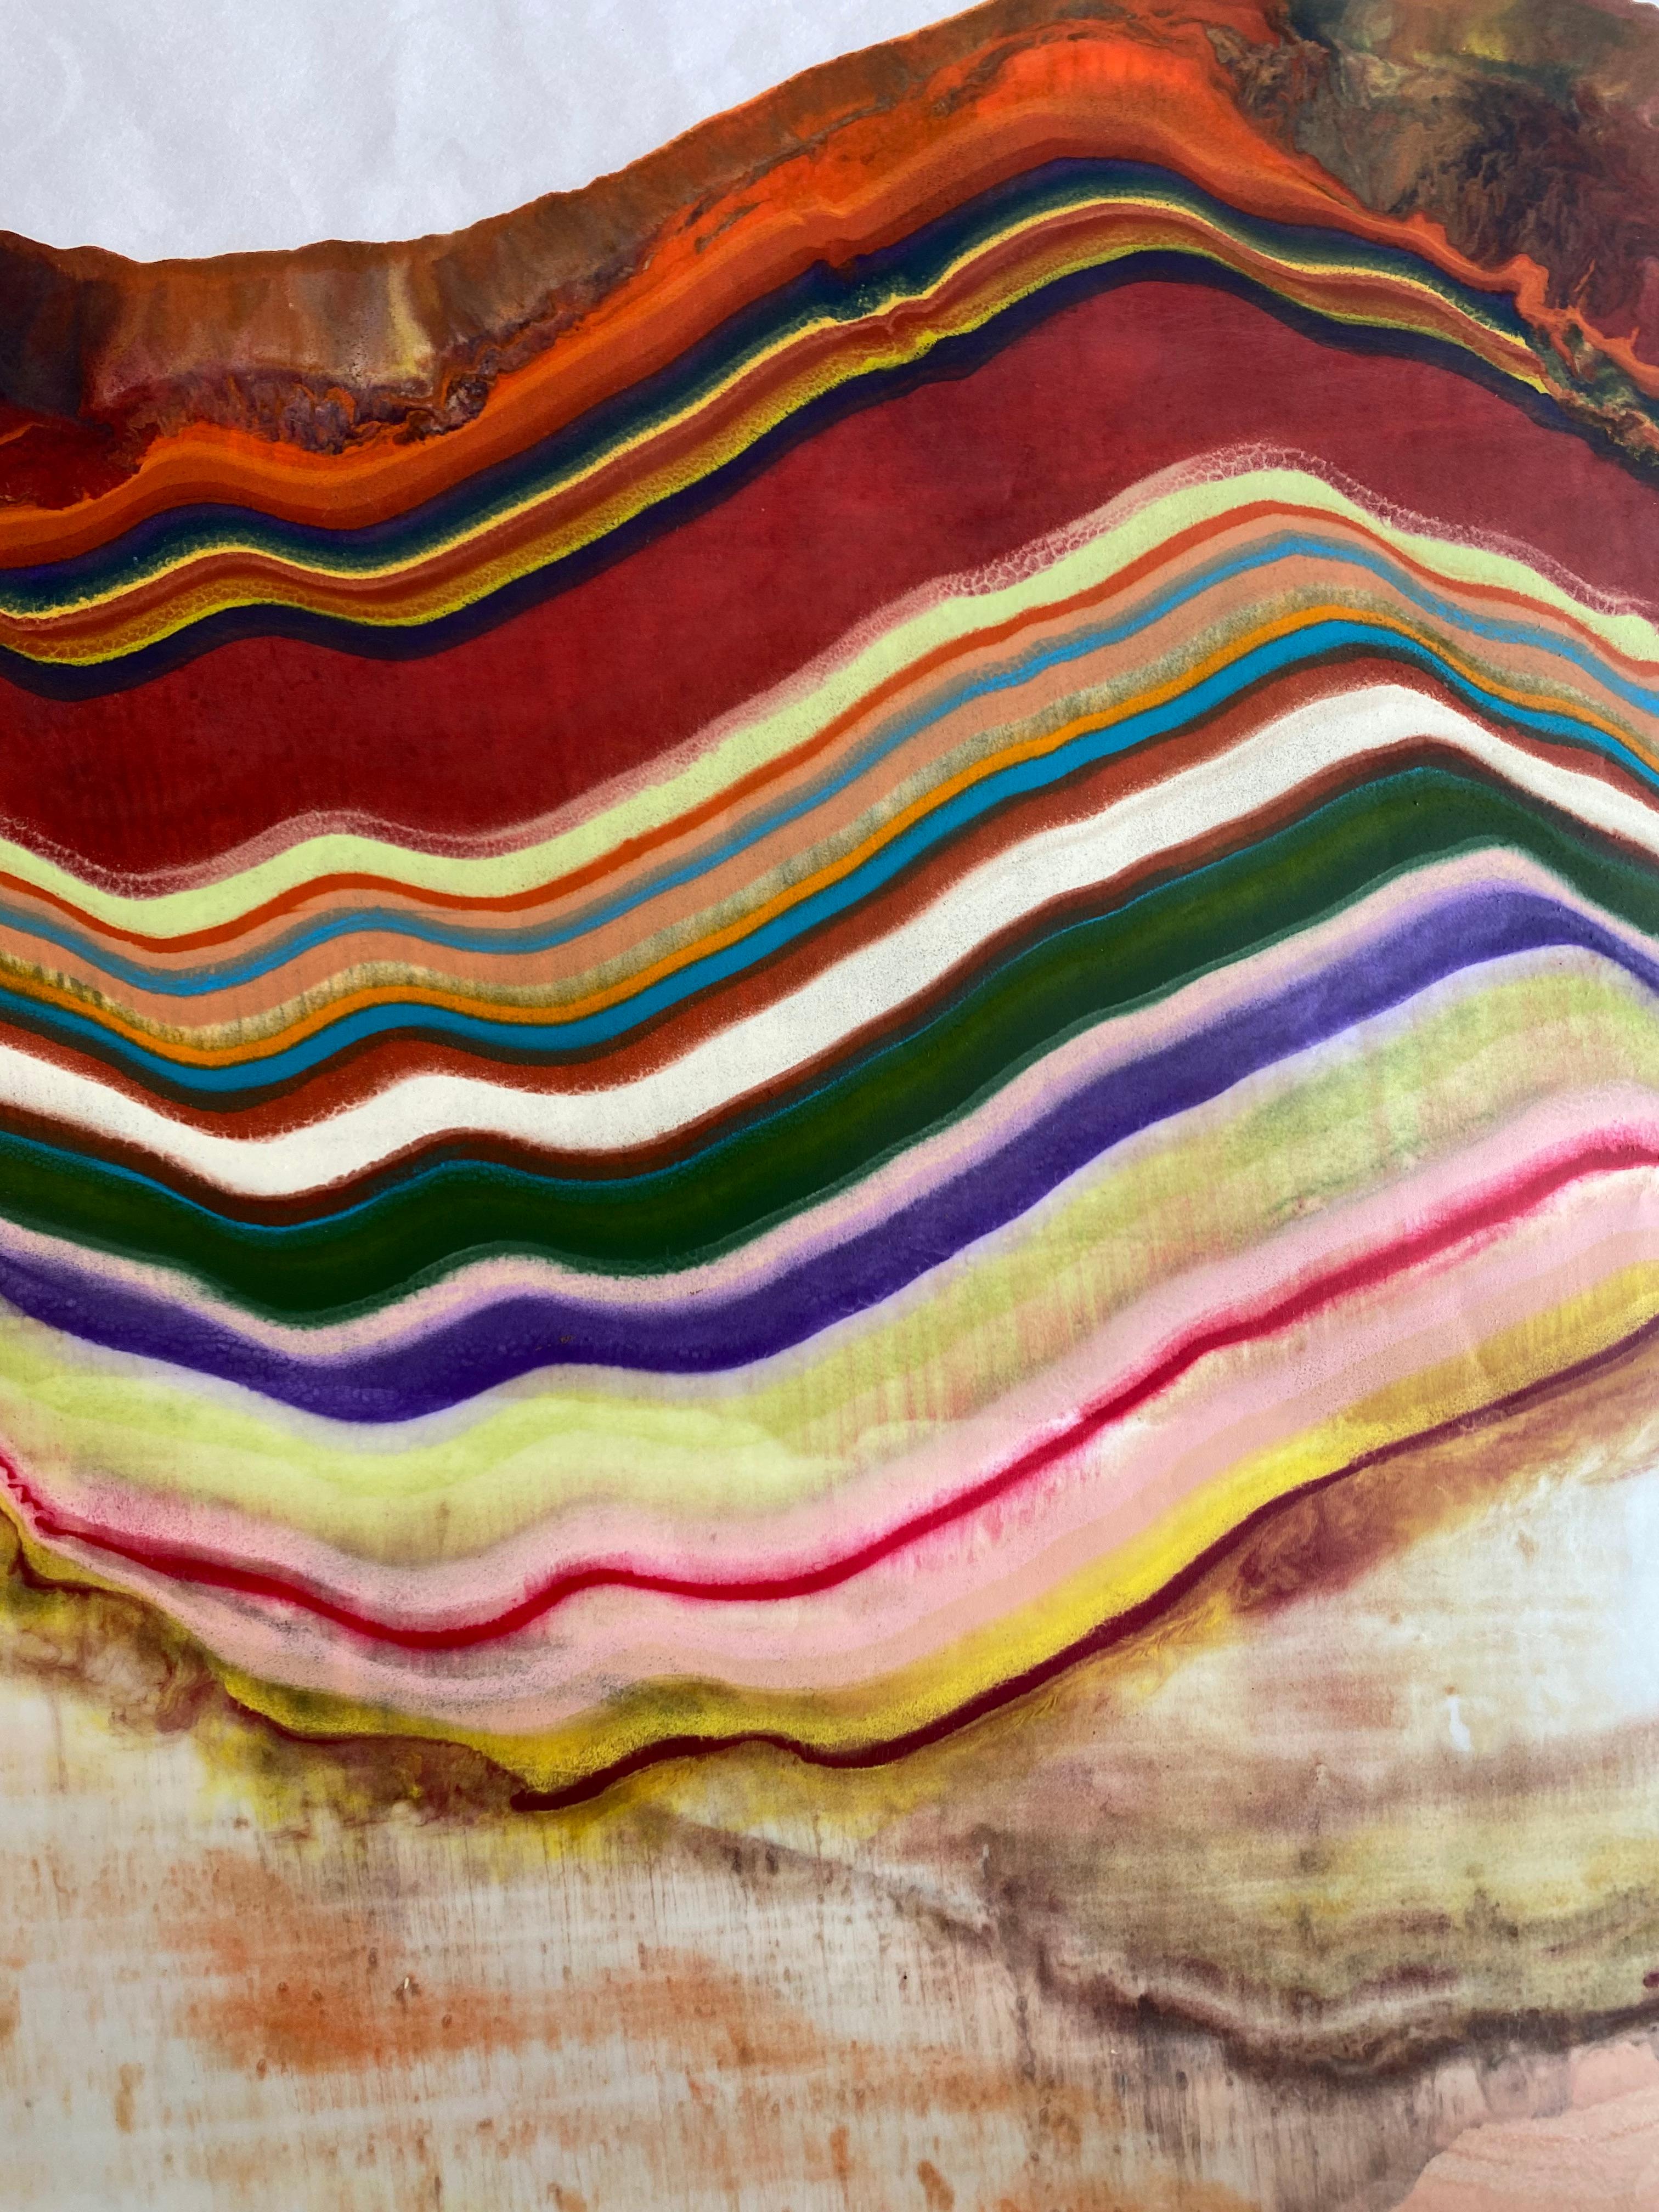 Laura Moriarty's Ex Uno Plures 13 is a multicolored encaustic monotype on kozo paper. Layers of pigmented beeswax on lightweight paper create an undulating composition suggesting layers of the earth's crust and geological formations depicted in